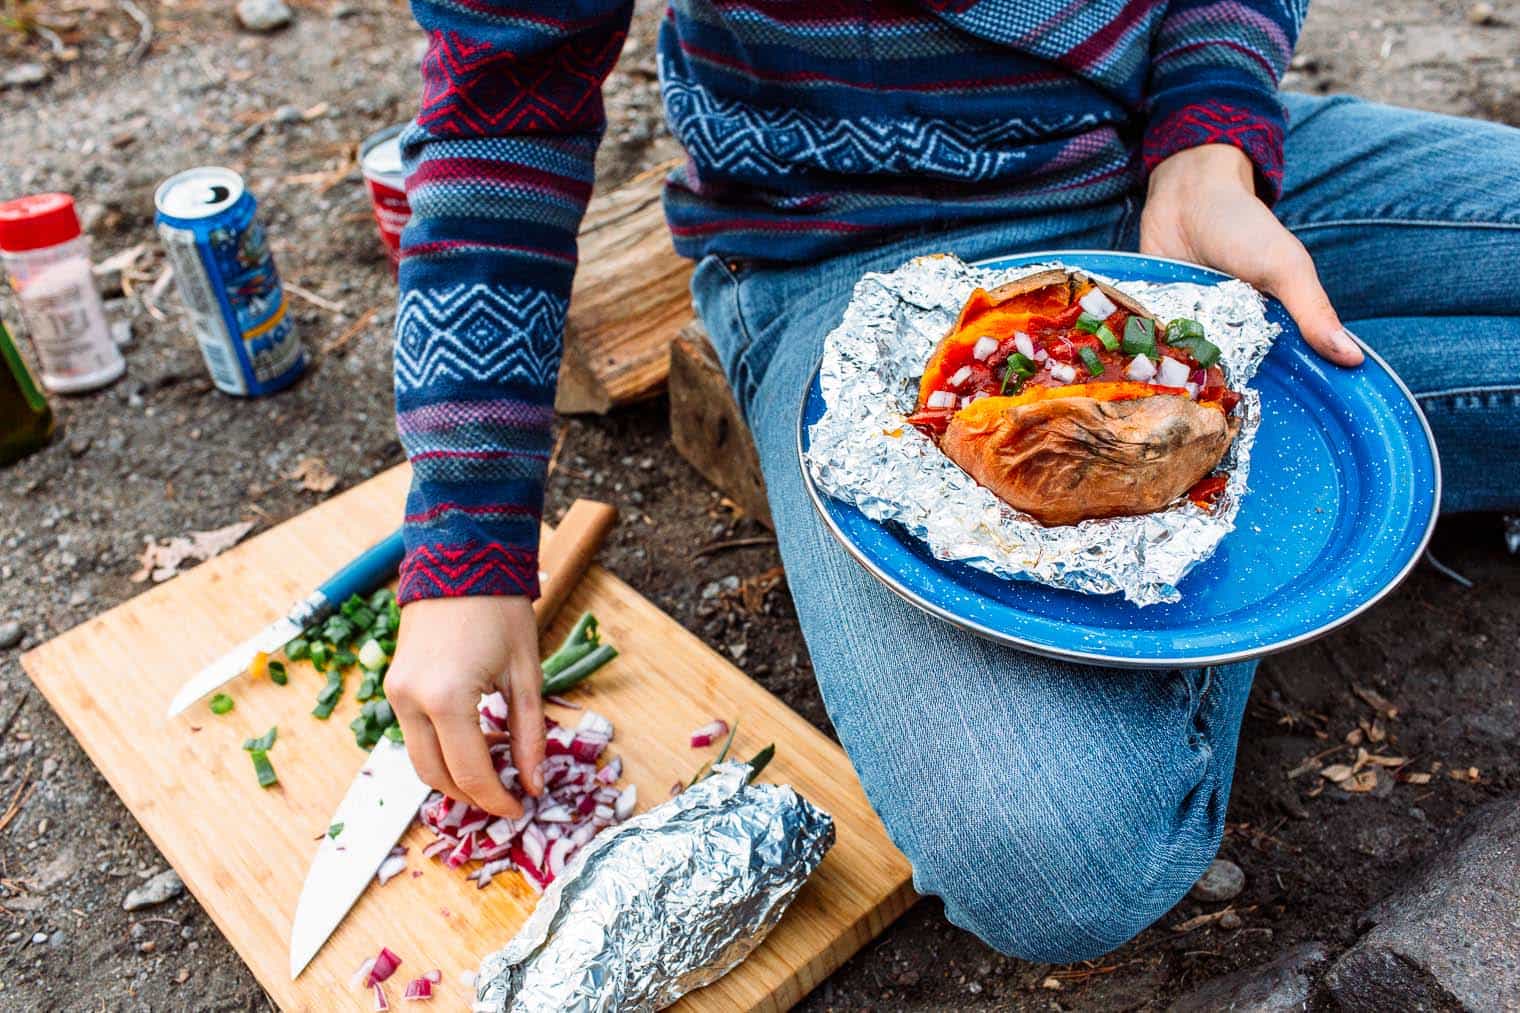 A hearty meal perfect for fall camping trips, this chili stuffed baked sweet potato recipe is easy to make around the campfire.